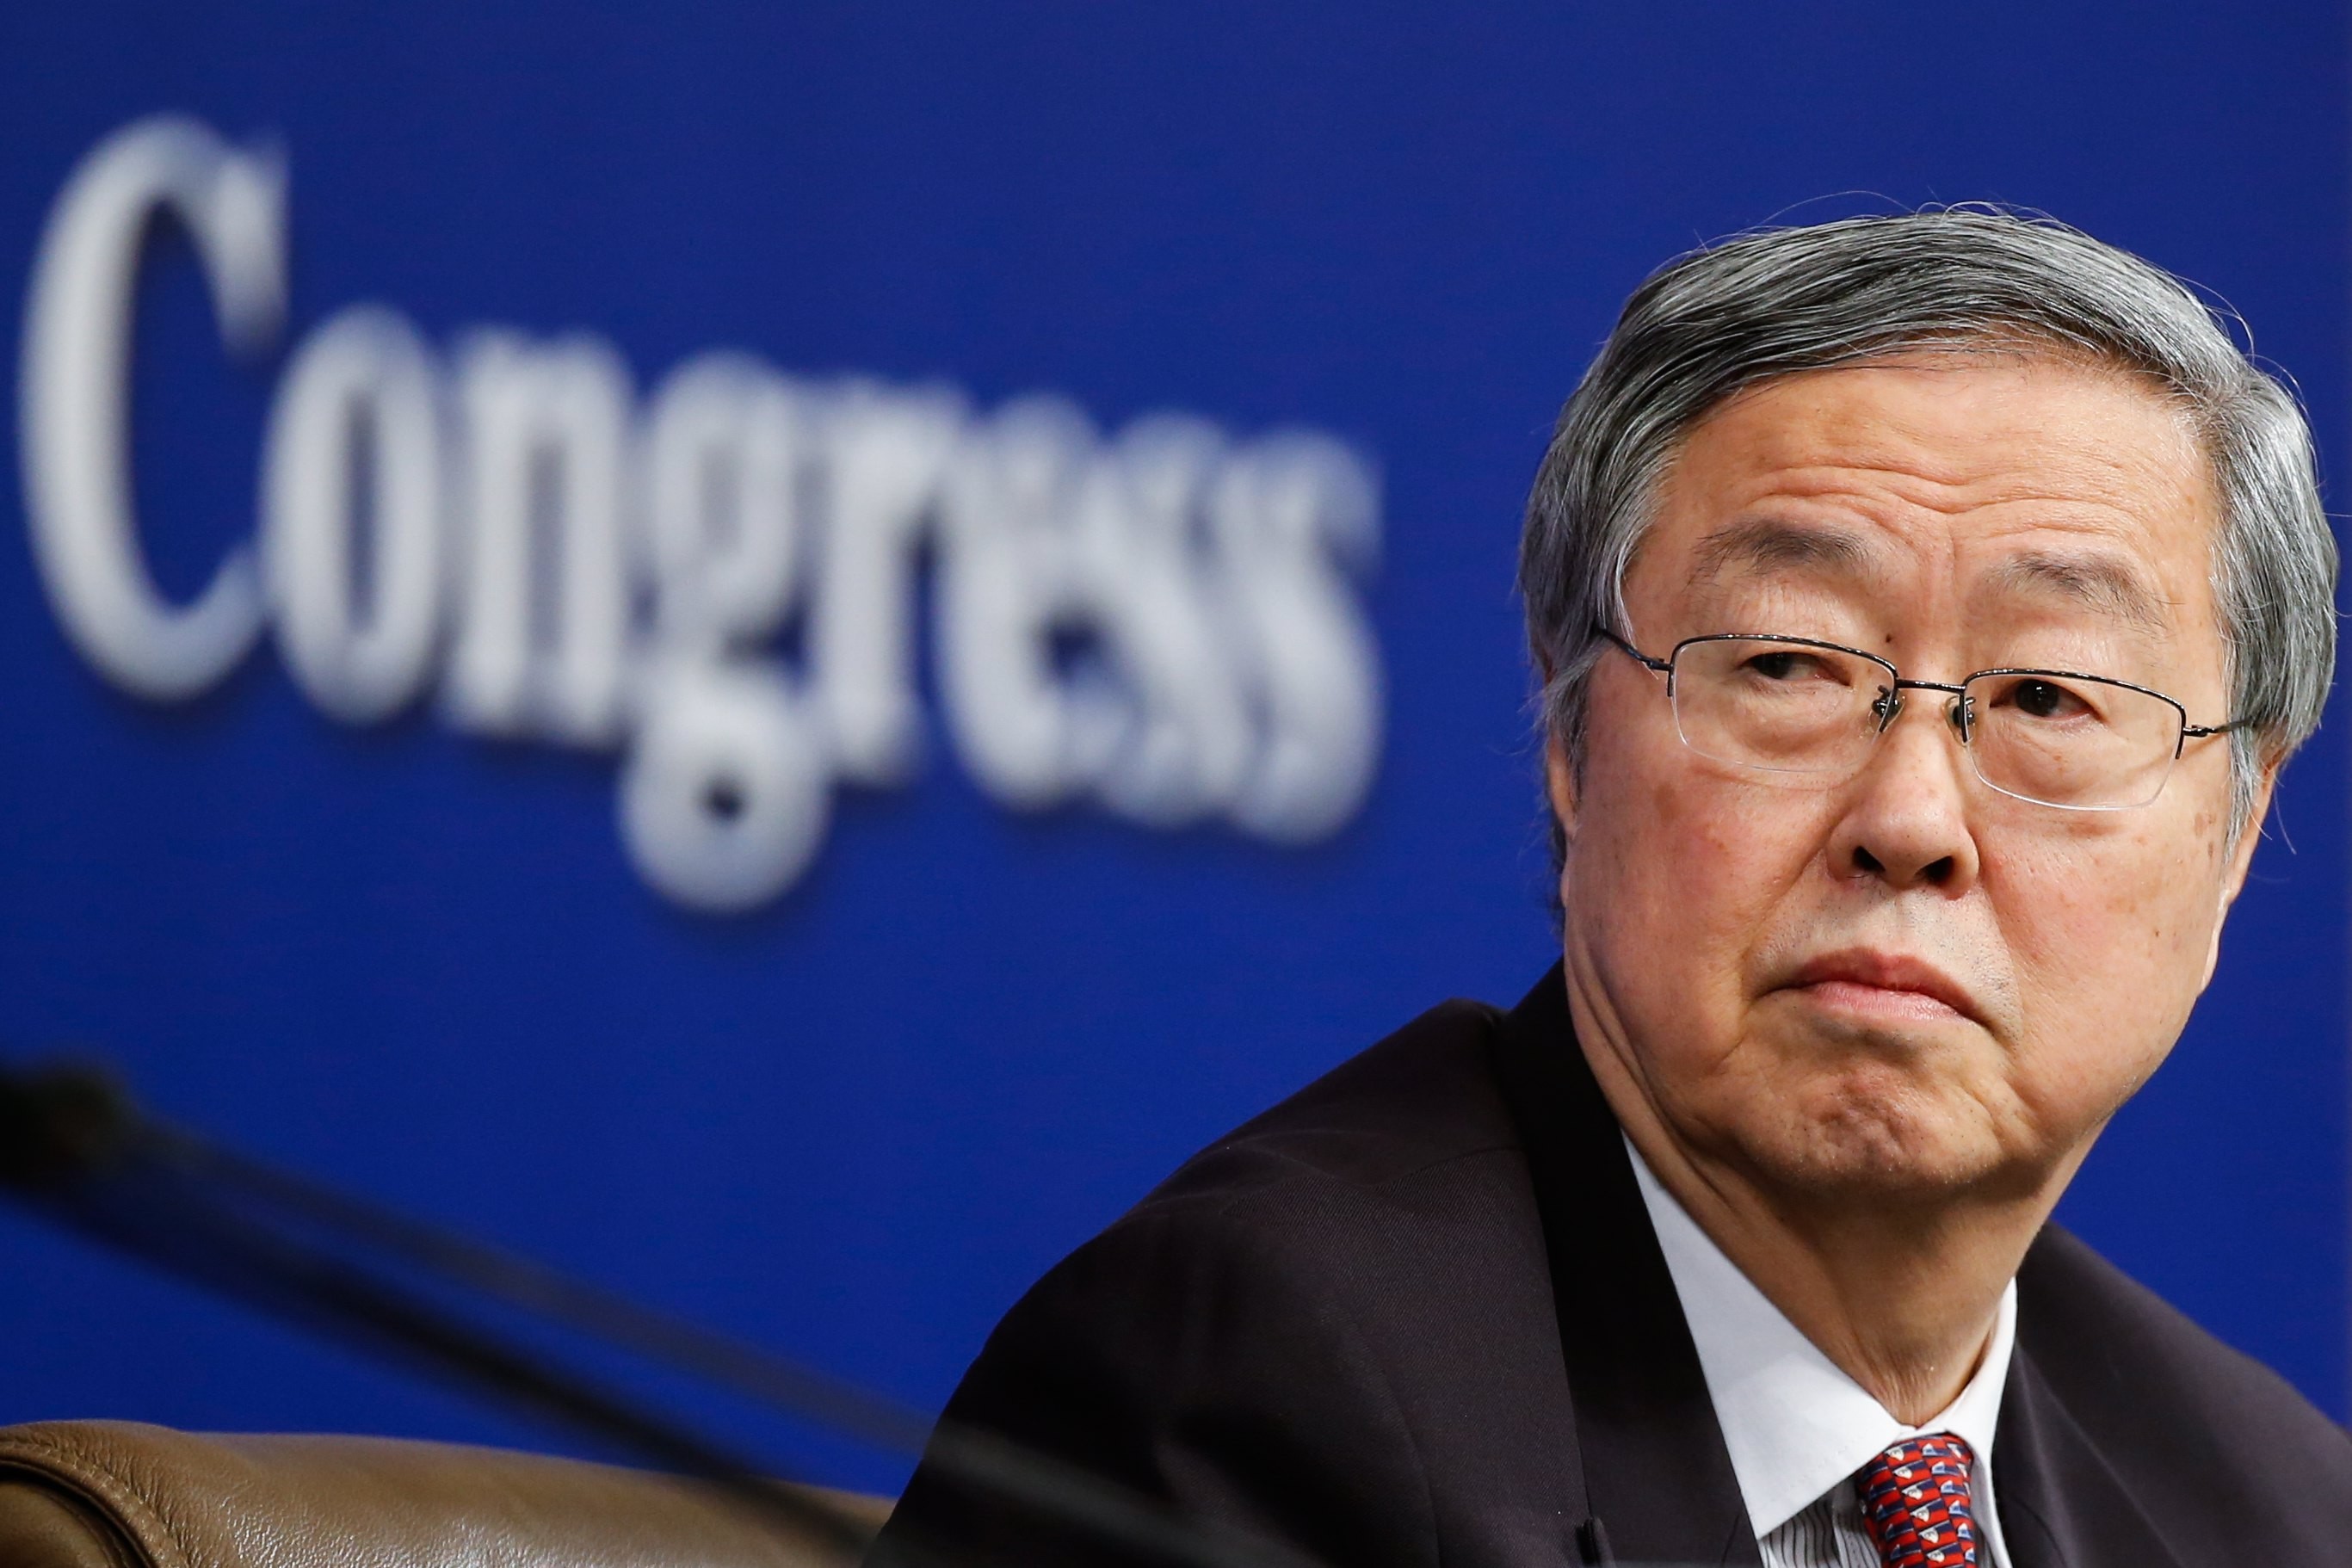 Zhou Xiaochuan, governor of the People's Bank of China, is urging China to be bolder in embracing foreign competition. Photo: EPA